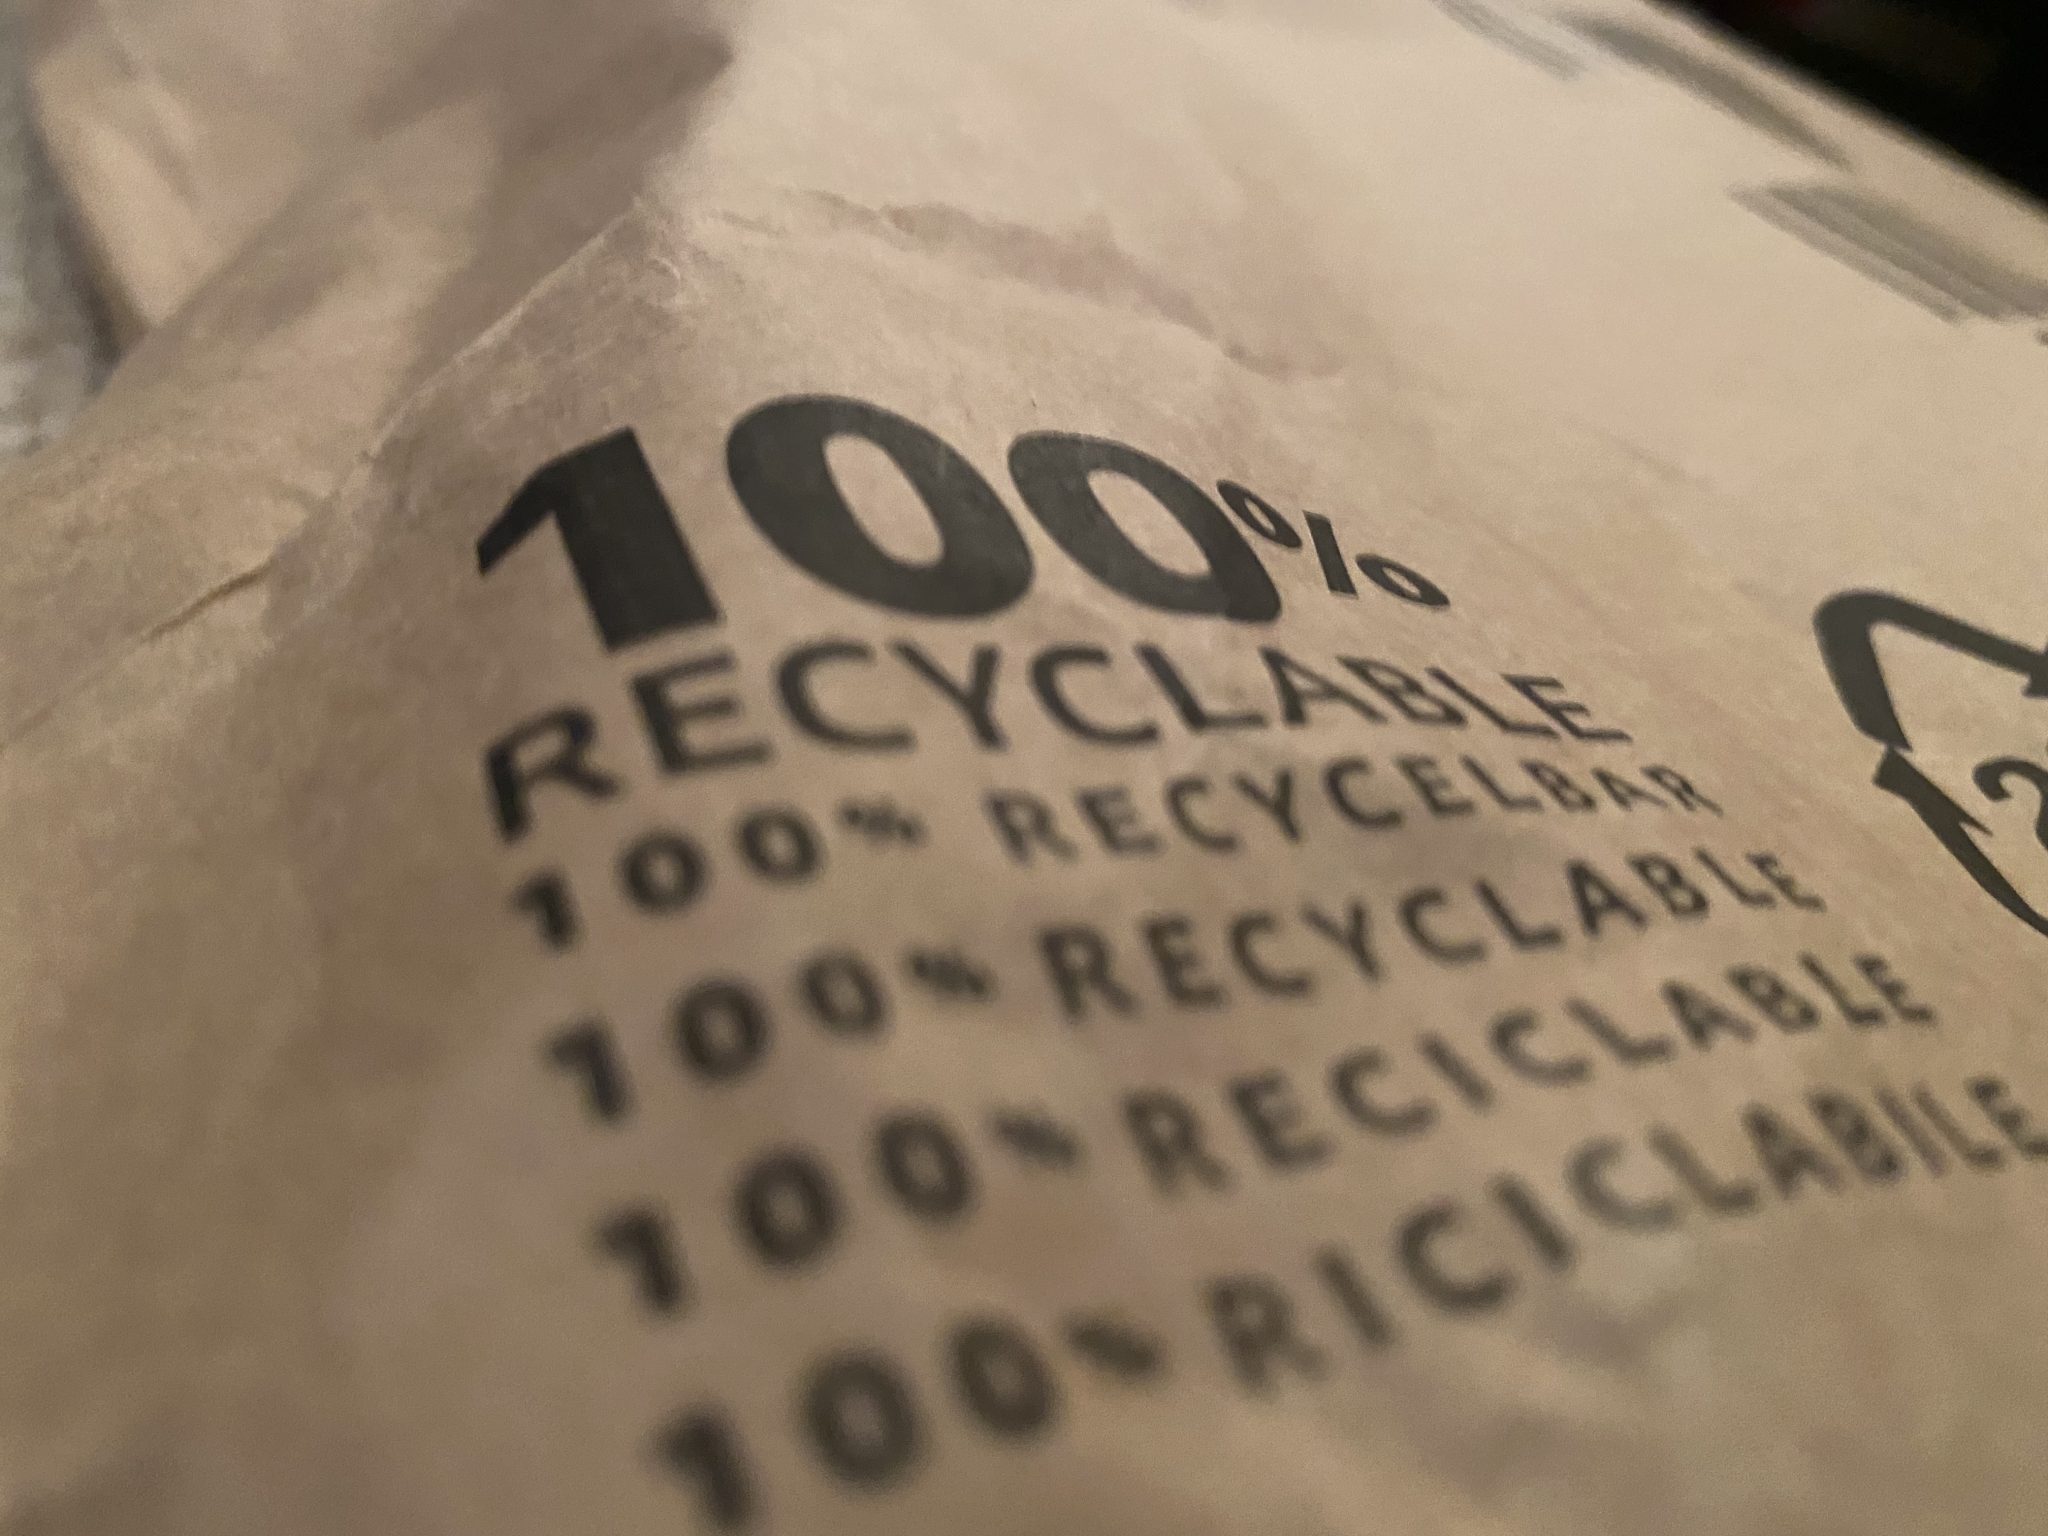 Sustainable packaging goals will be difficult to meet, according to Gartner